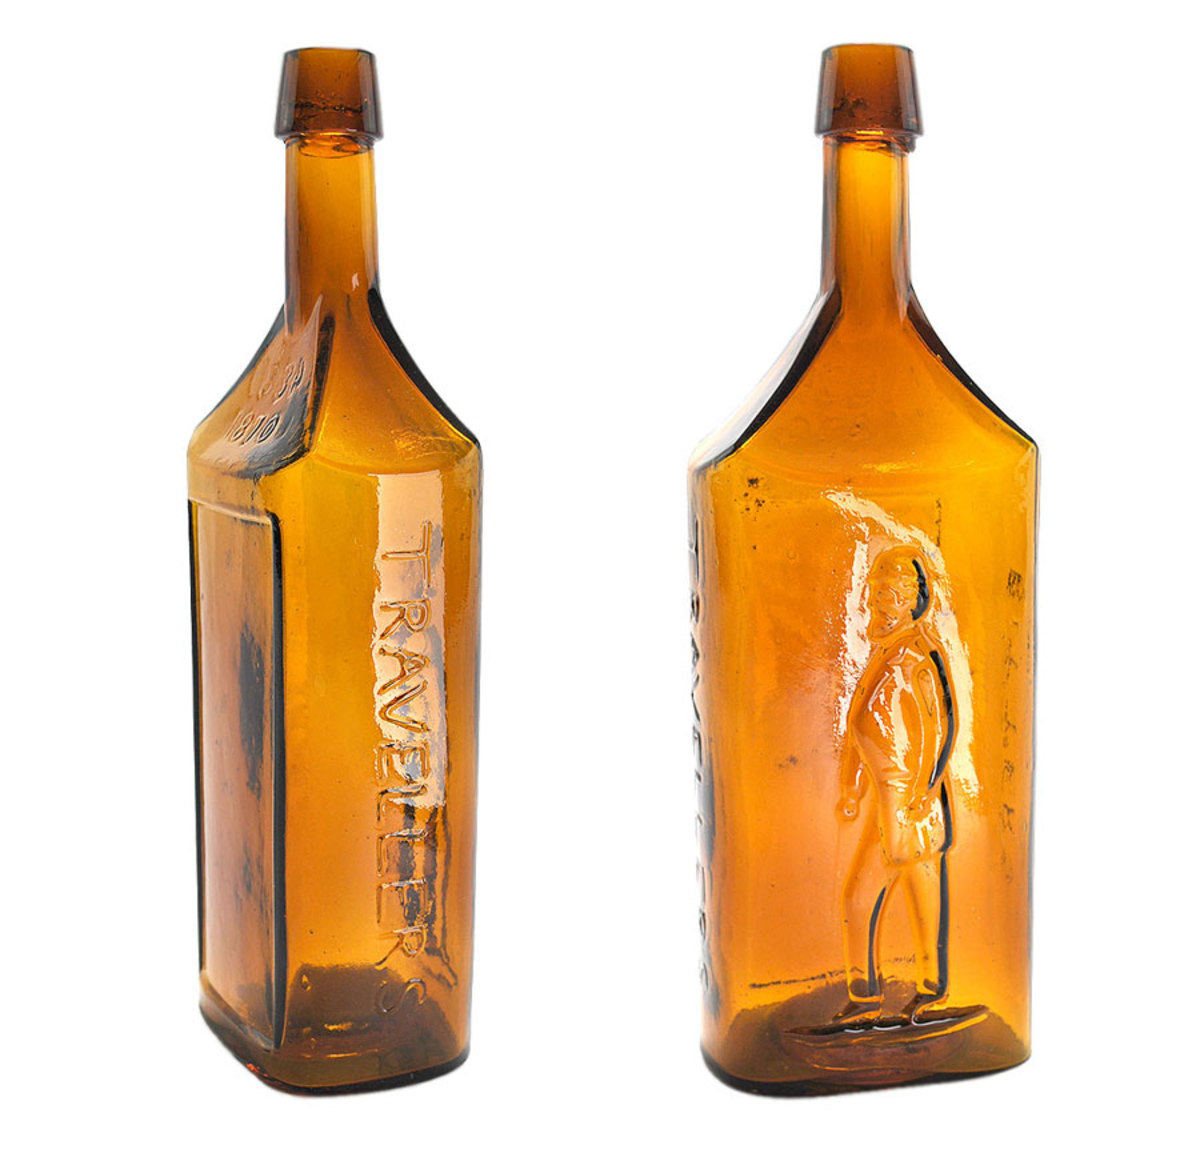 Traveller’s Bitters bottle, circa 1834-1870, with motif of a walking man in the likeness of General Robert E. Lee; estimate: $8,000-$12,000.